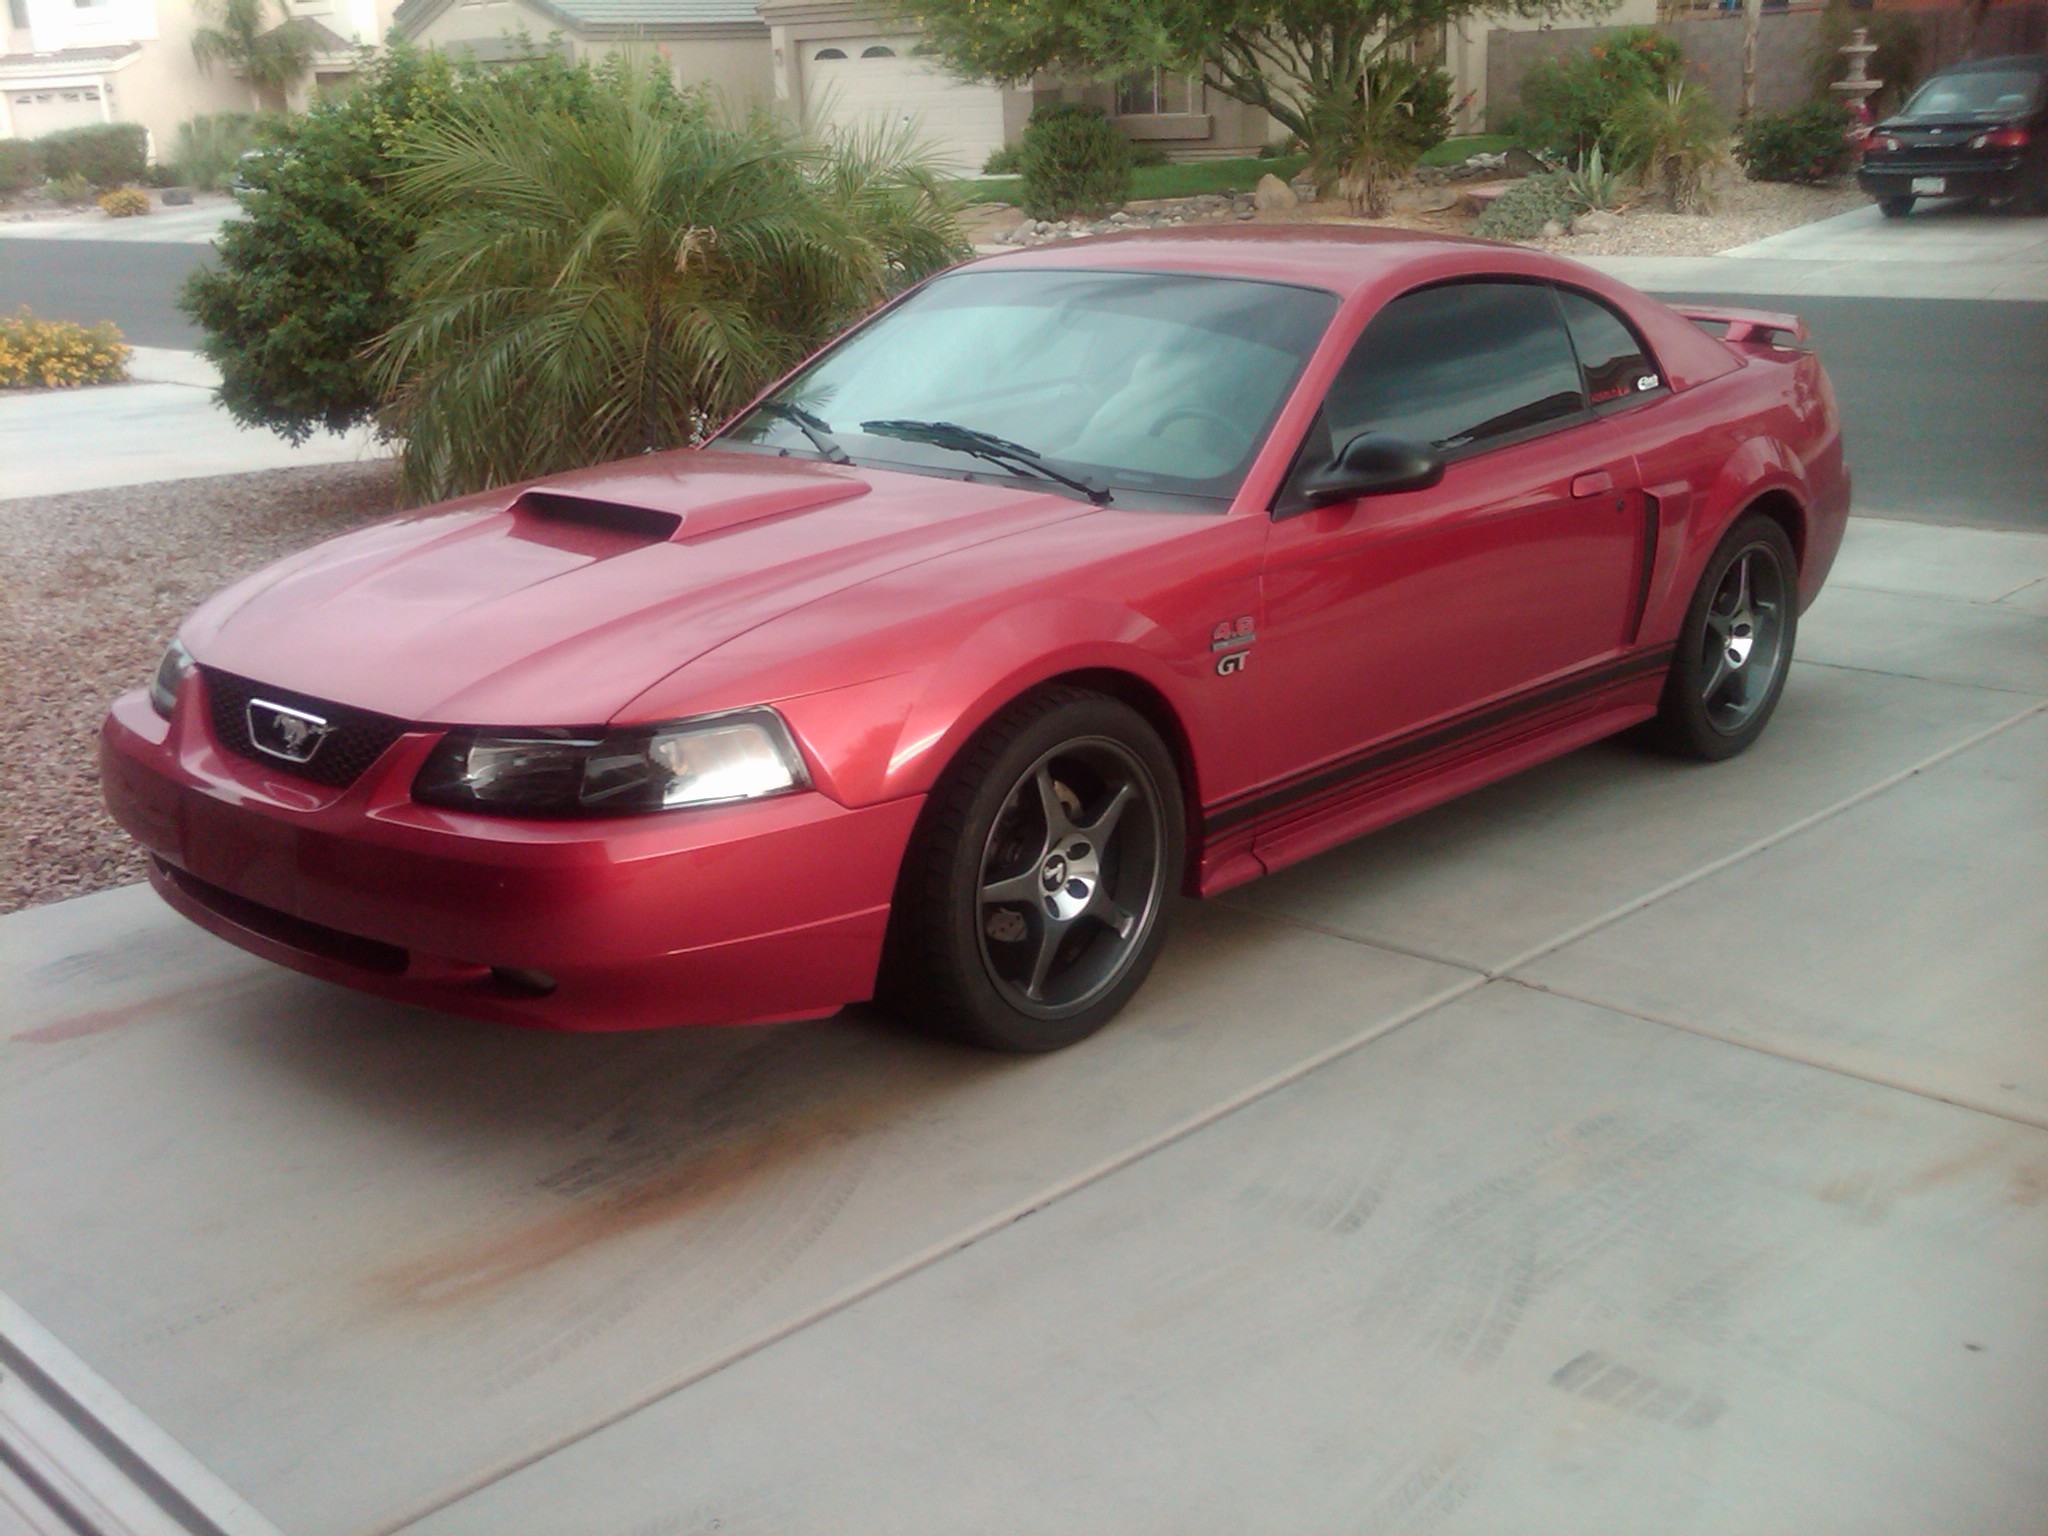 2001 Ford mustang 0-60 times #1